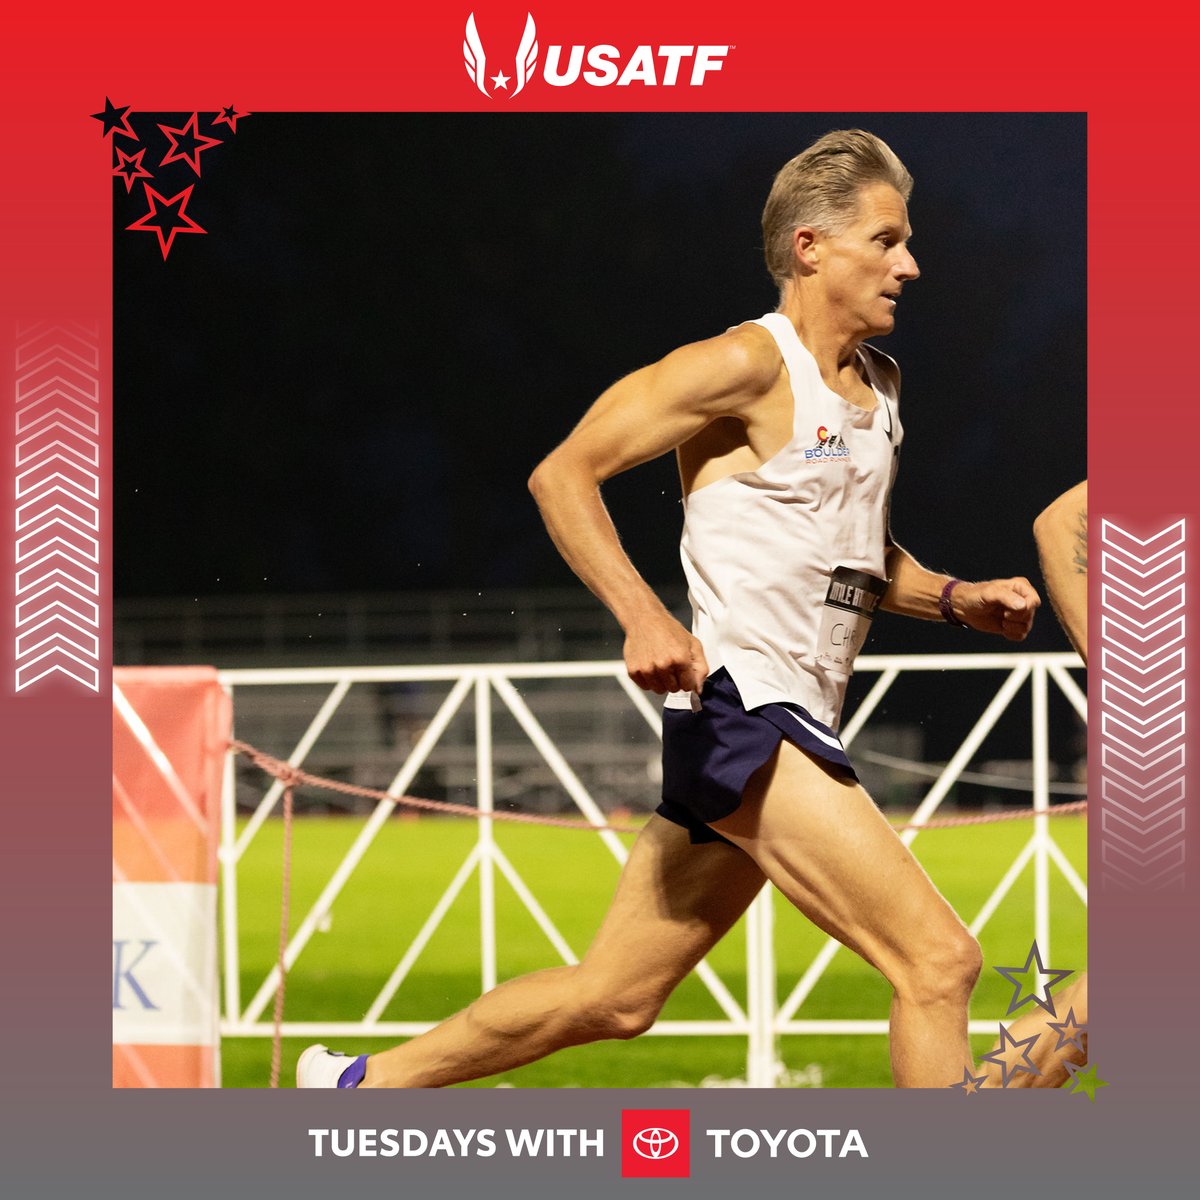 usatf: Meet Chris McDonald, September’s #TuesdayWithToyota feature!

After a nearly 30-year hiatus, Chris is back on the track competing in USATF Masters events.

'USATF has helped me regain fitness, motivation, and enthusiasm for the sport.”

Read more:…